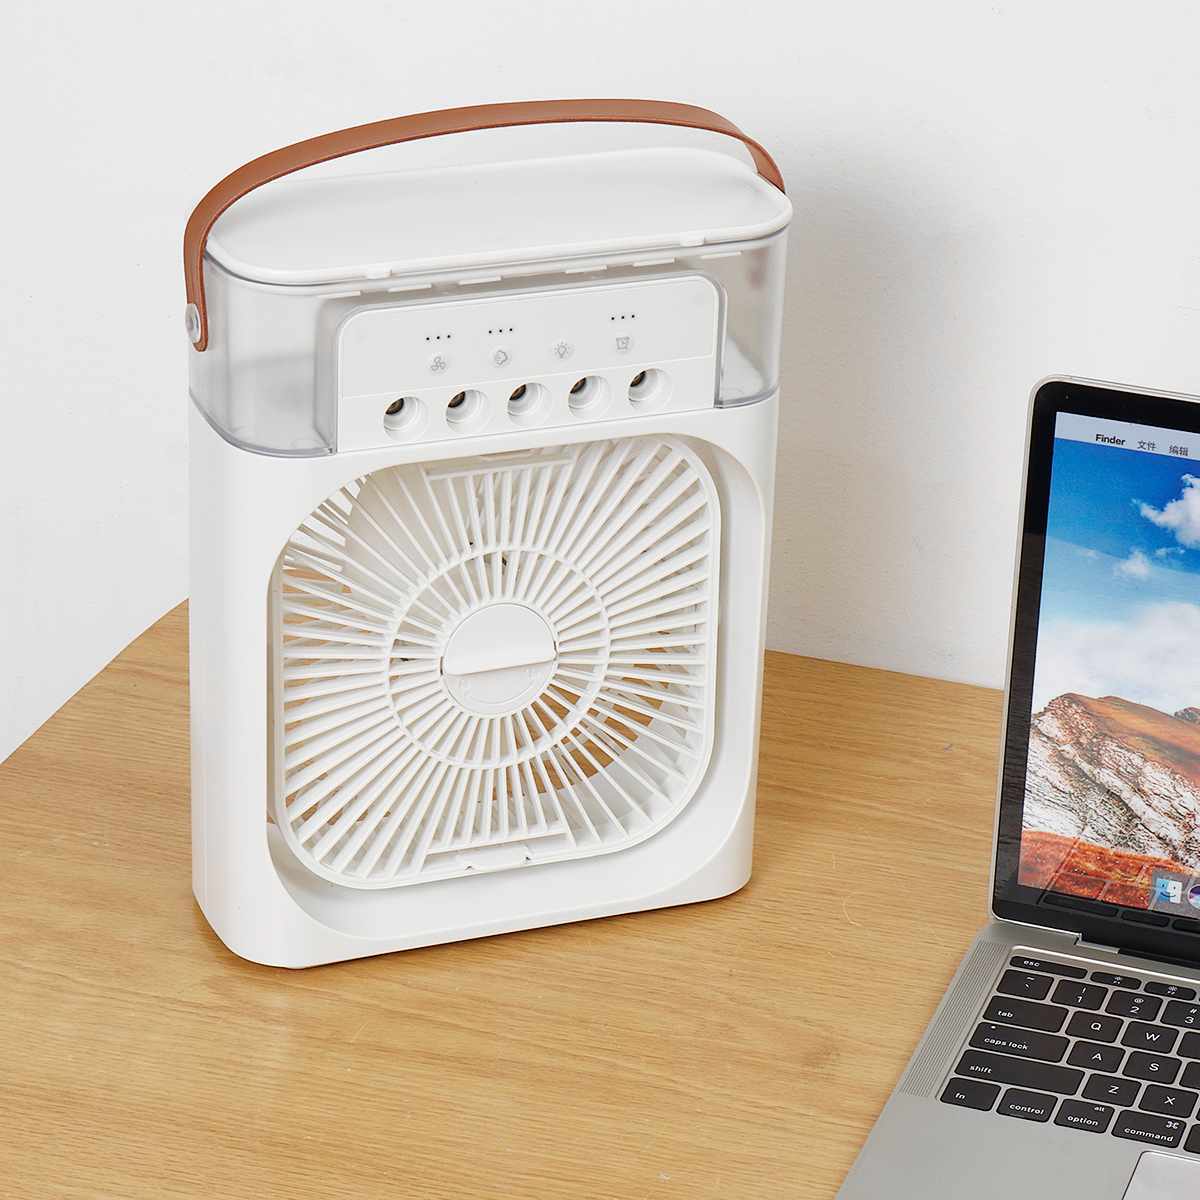 **NET**USB Portable Air Cooler Fan Air Conditioner Light Desktop Fan Air Cooler Humidifier Purify Bedroom with 7 Colors LED Night Light